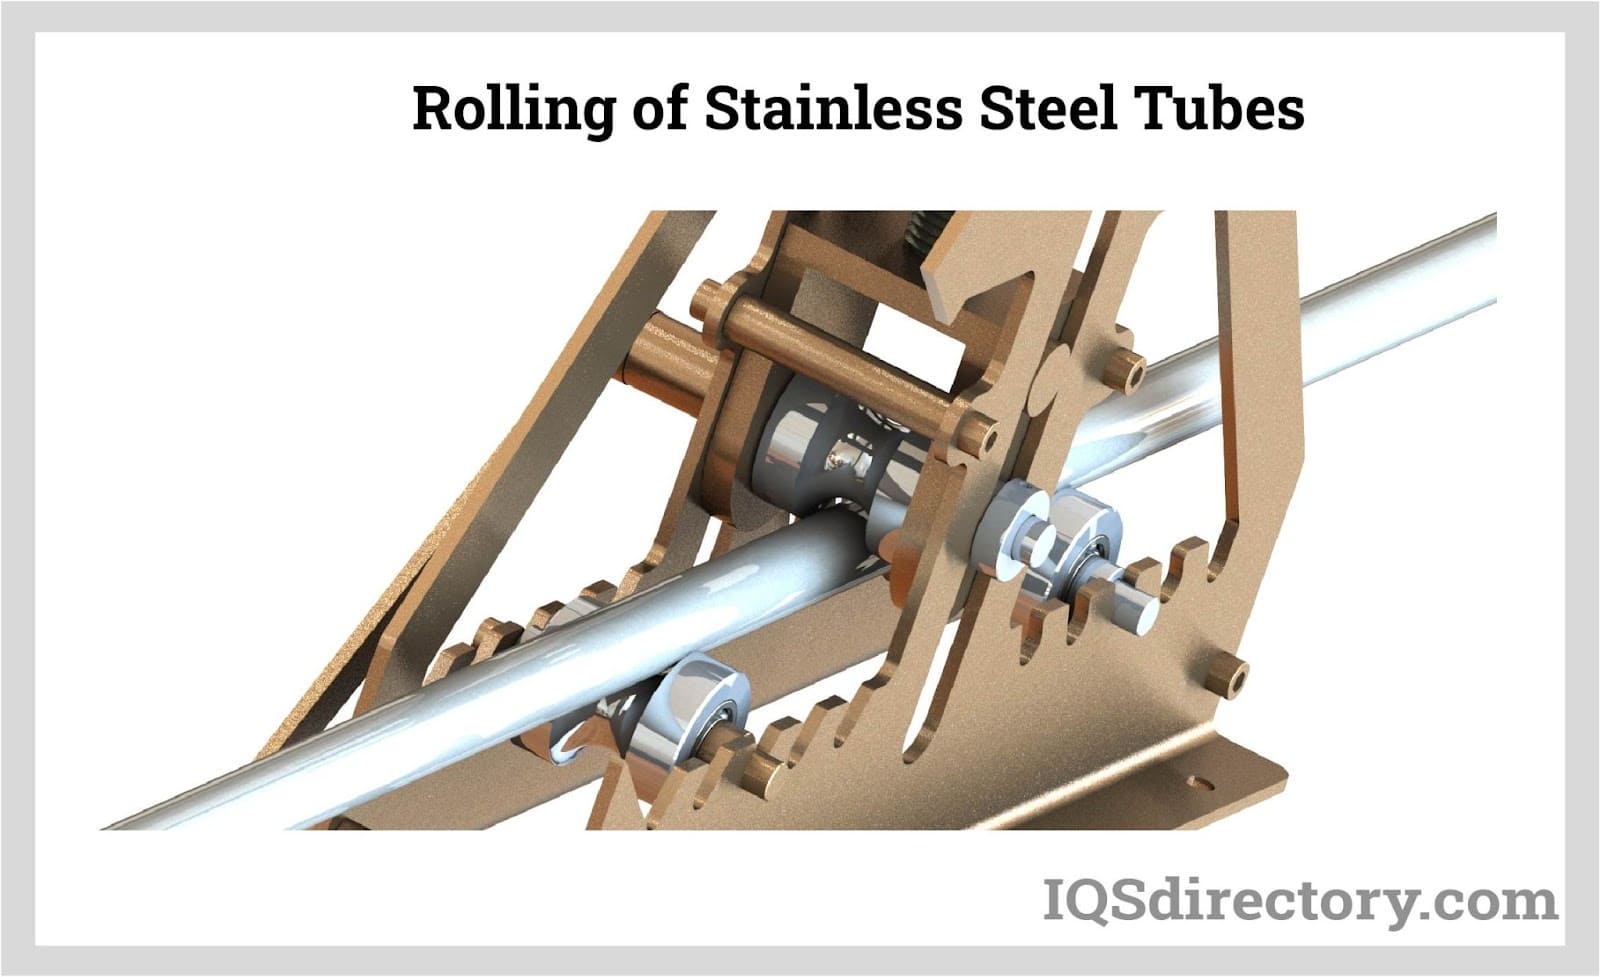 Rolling of Stainless Steel Tubes